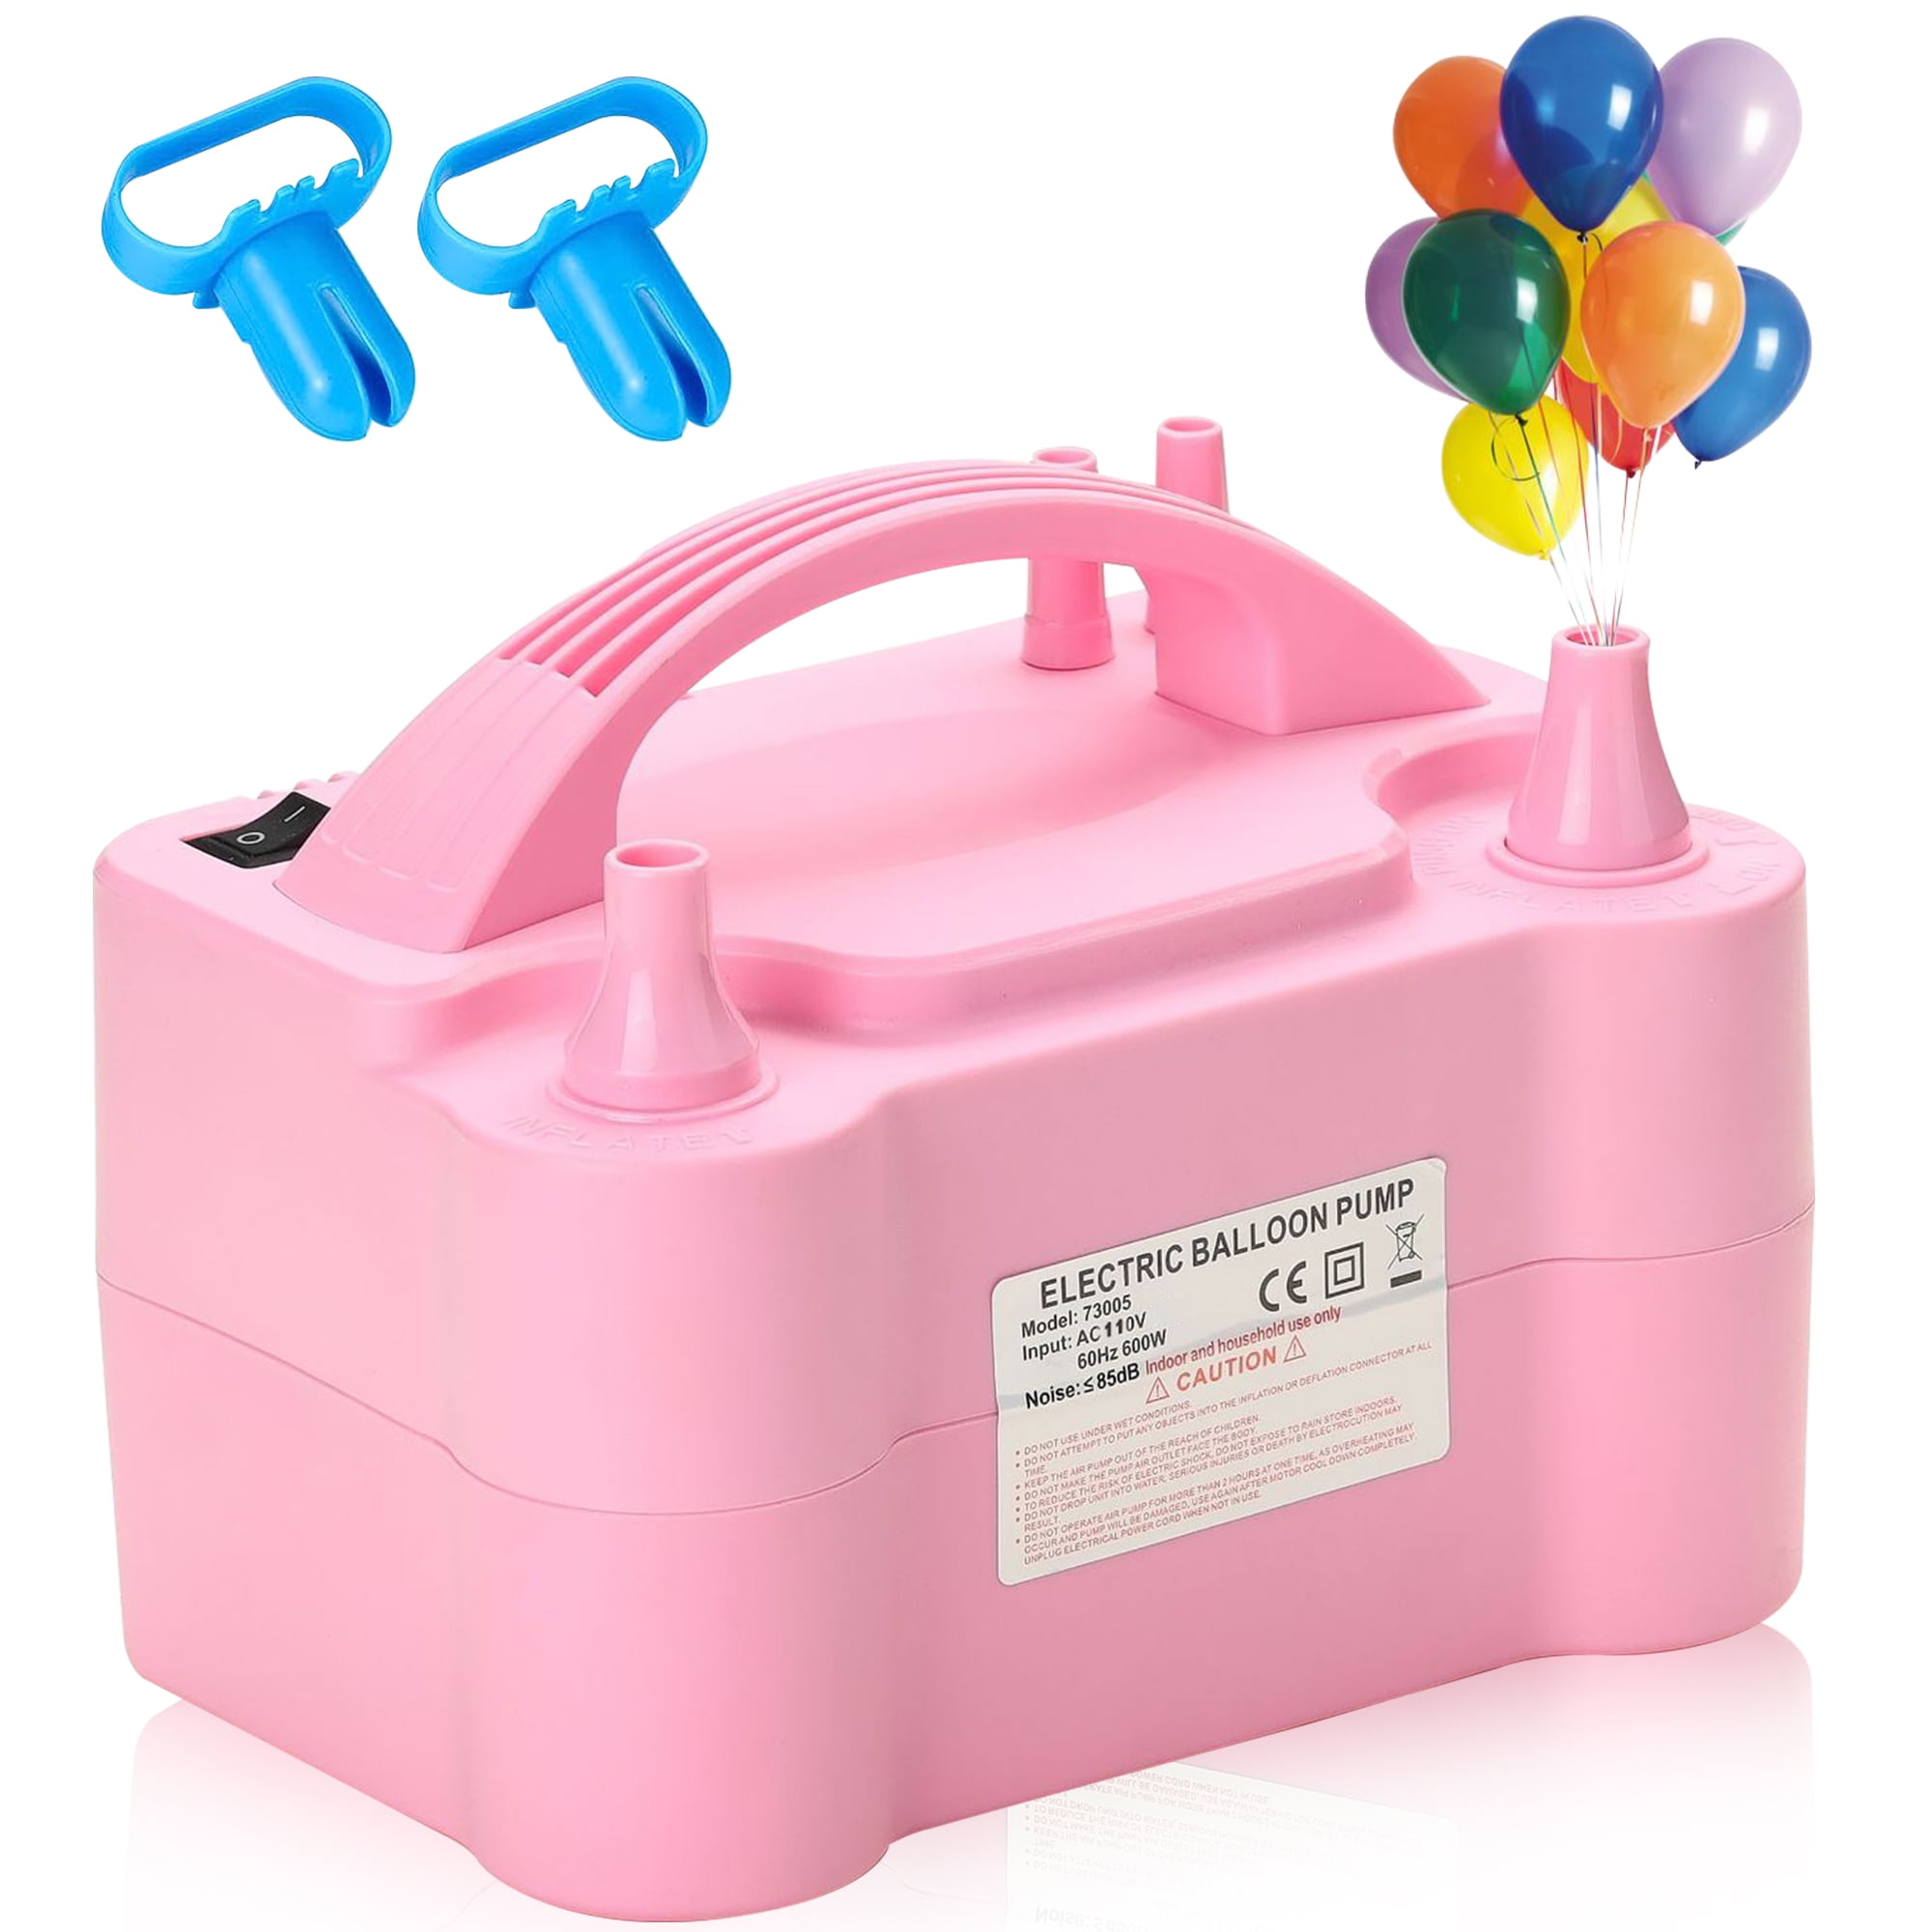 TOOMCYD Electric Balloon Pump Portable Dual Nozzle Balloon Inflator Blower  for Party Decoration with Tying Tool,Inflating Faster Save Time Rose Pink